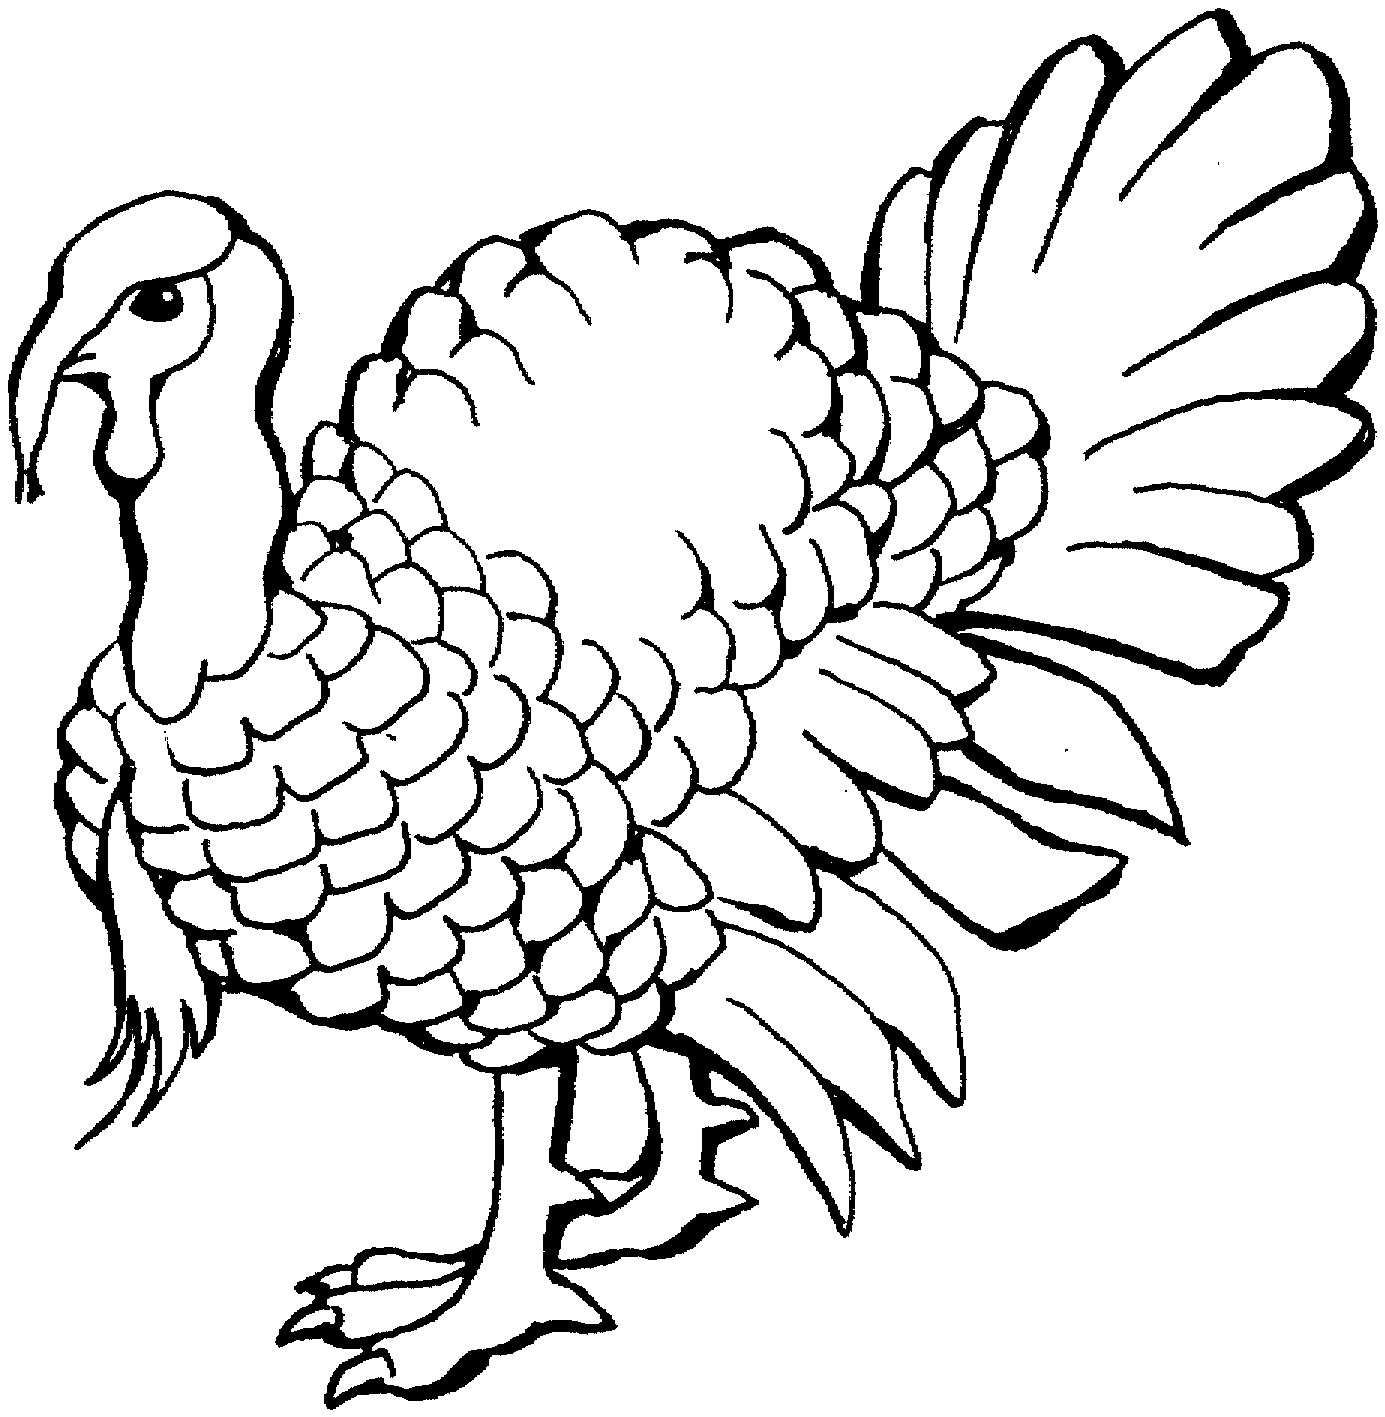 Printable Turkeys Coloring Pages
 Free Printable Turkey Coloring Pages For Kids